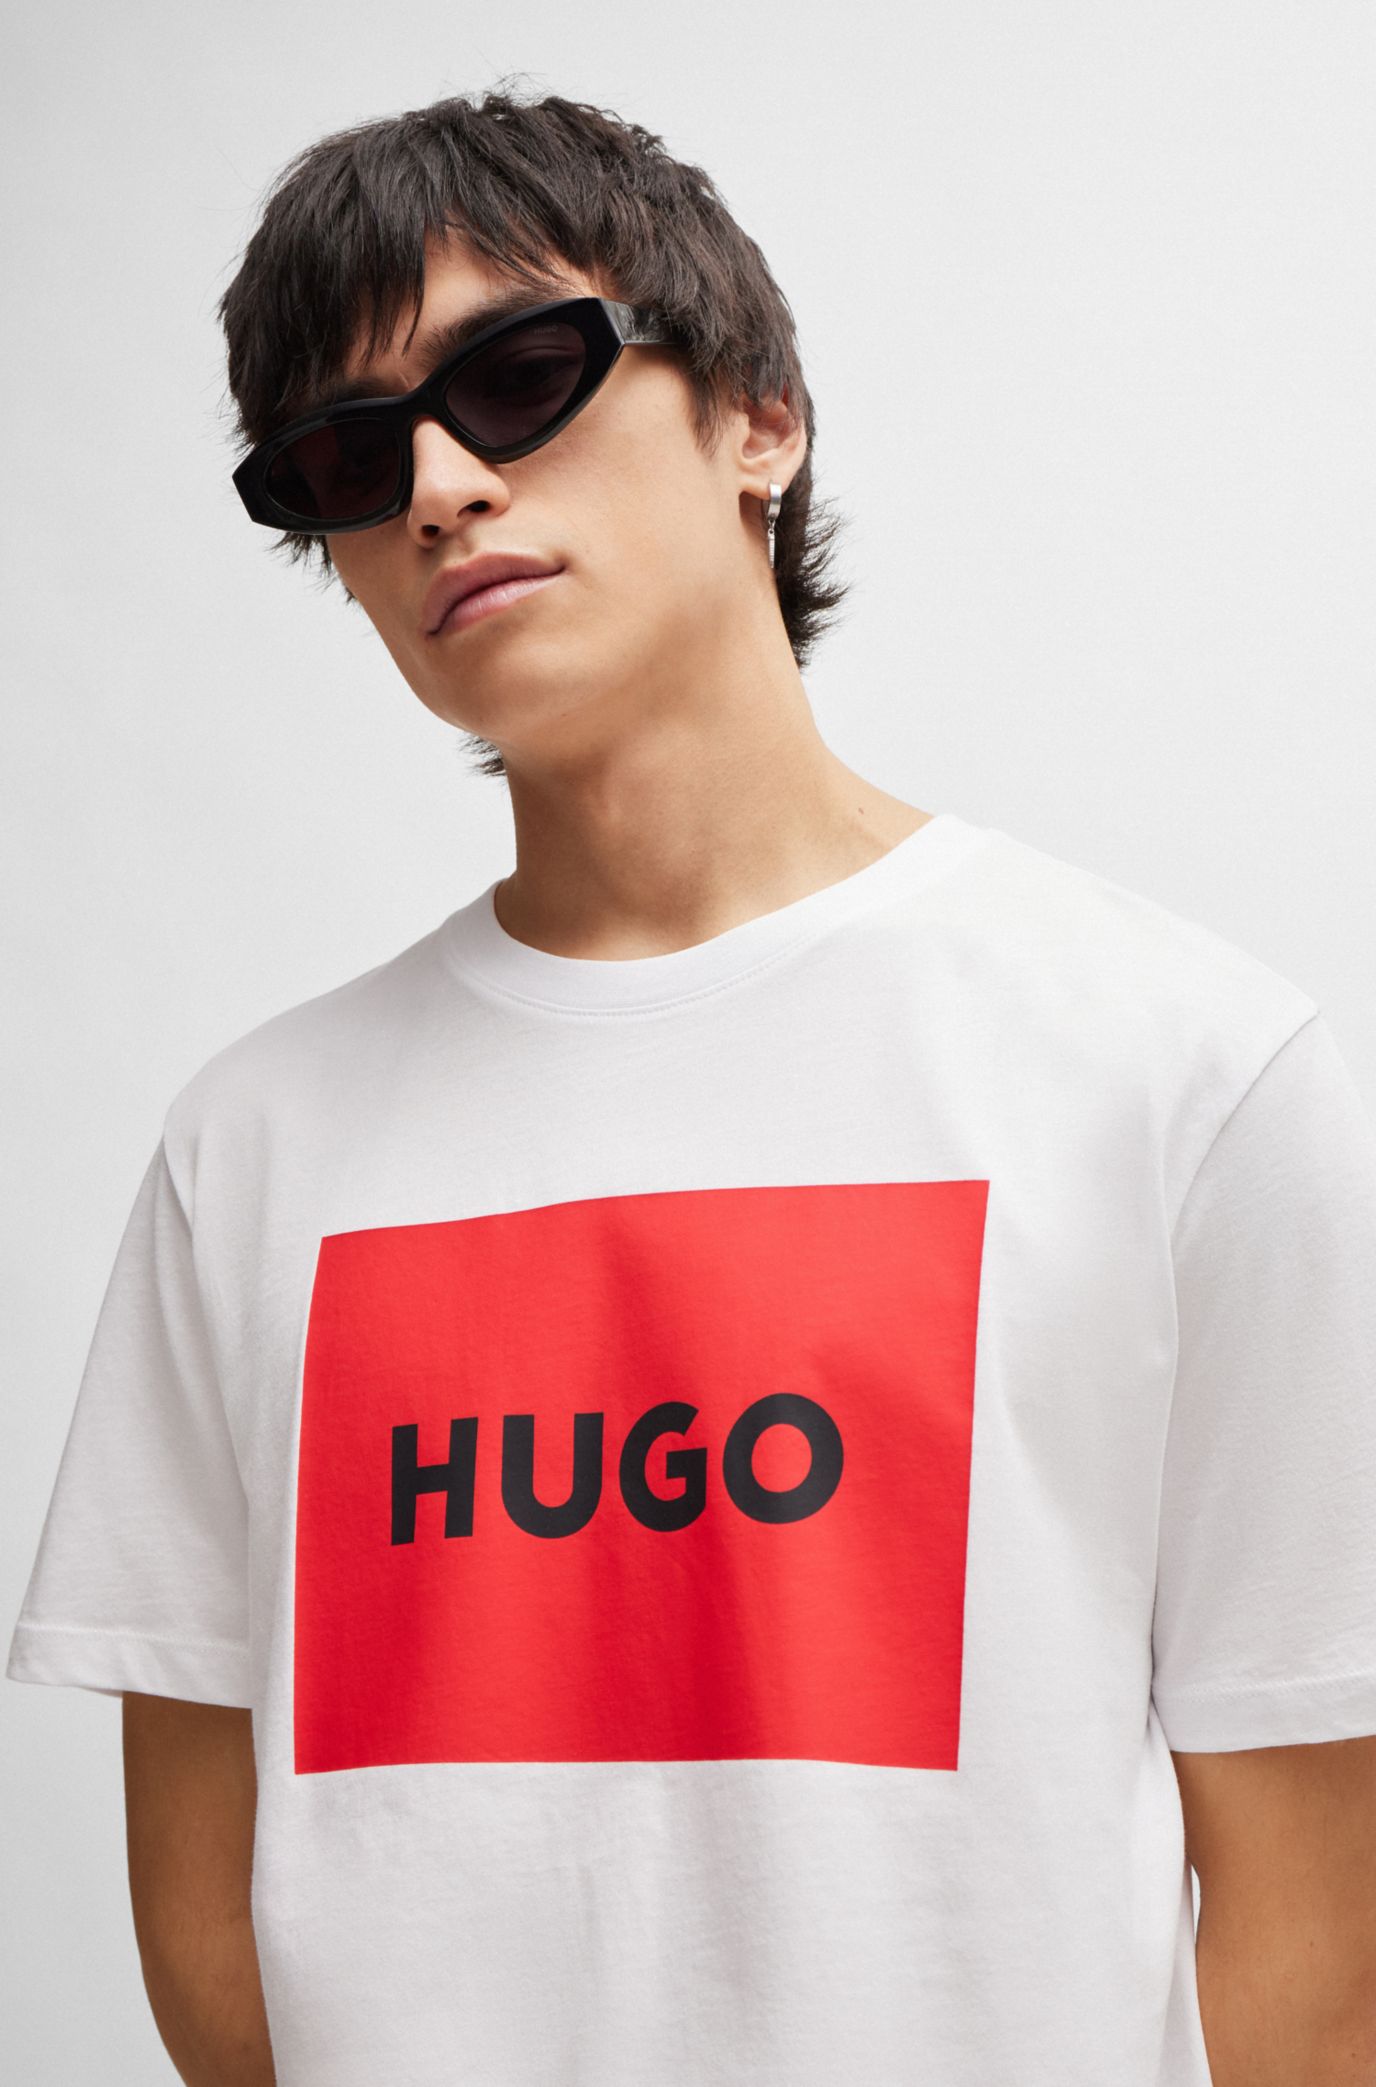 jersey - HUGO logo with T-shirt cotton box Crew-neck in